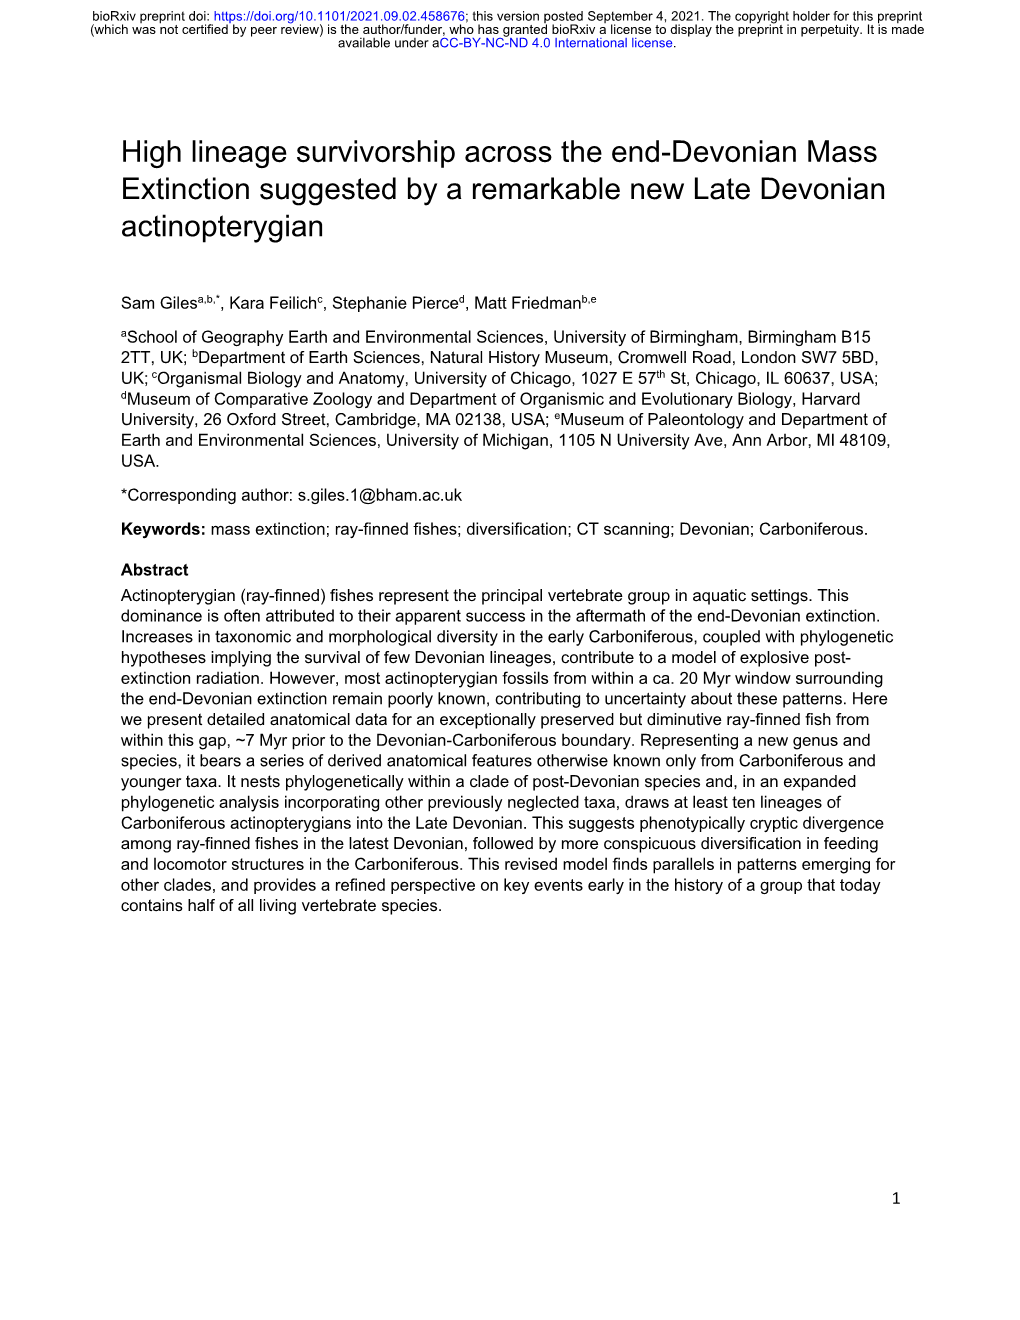 High Lineage Survivorship Across the End-Devonian Mass Extinction Suggested by a Remarkable New Late Devonian Actinopterygian